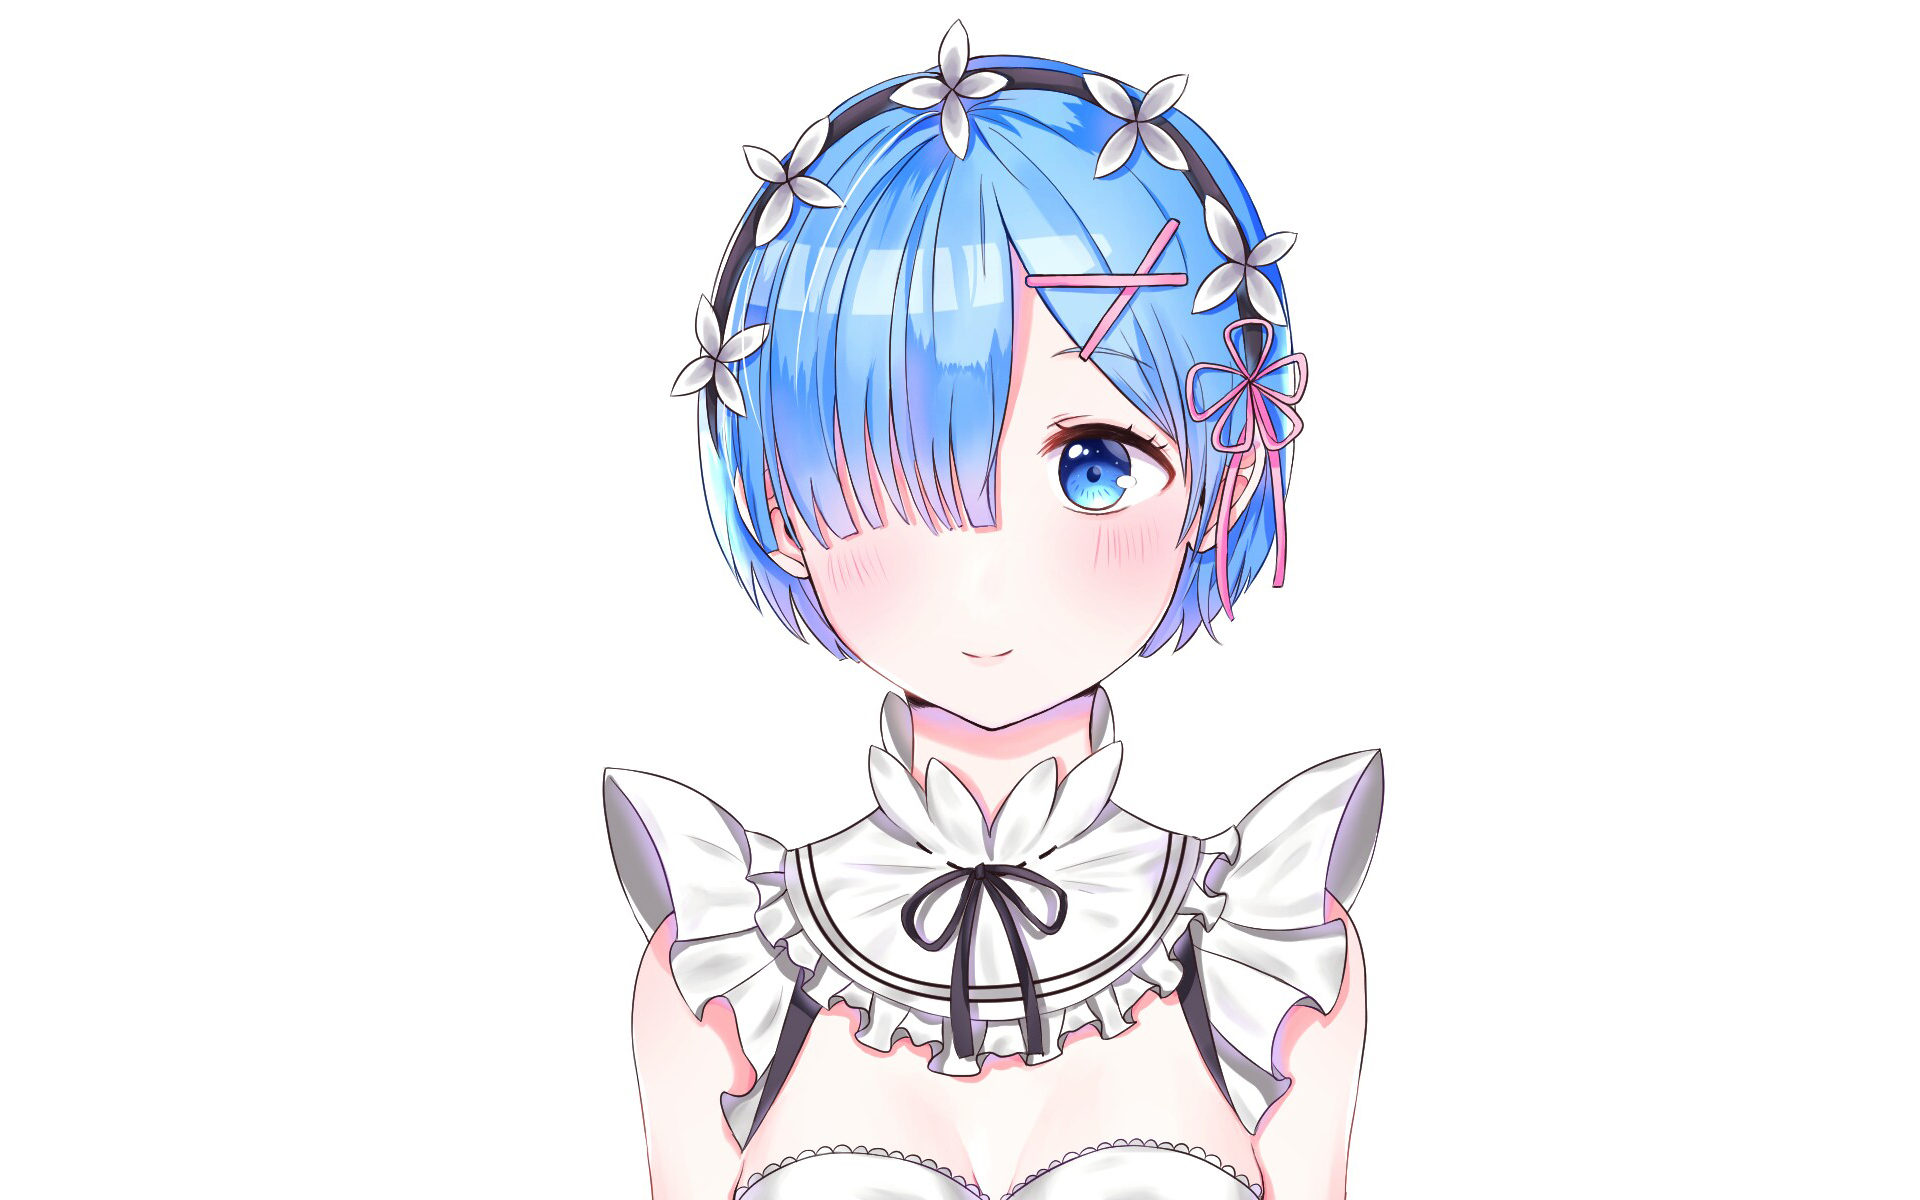 Rem from re:Zero